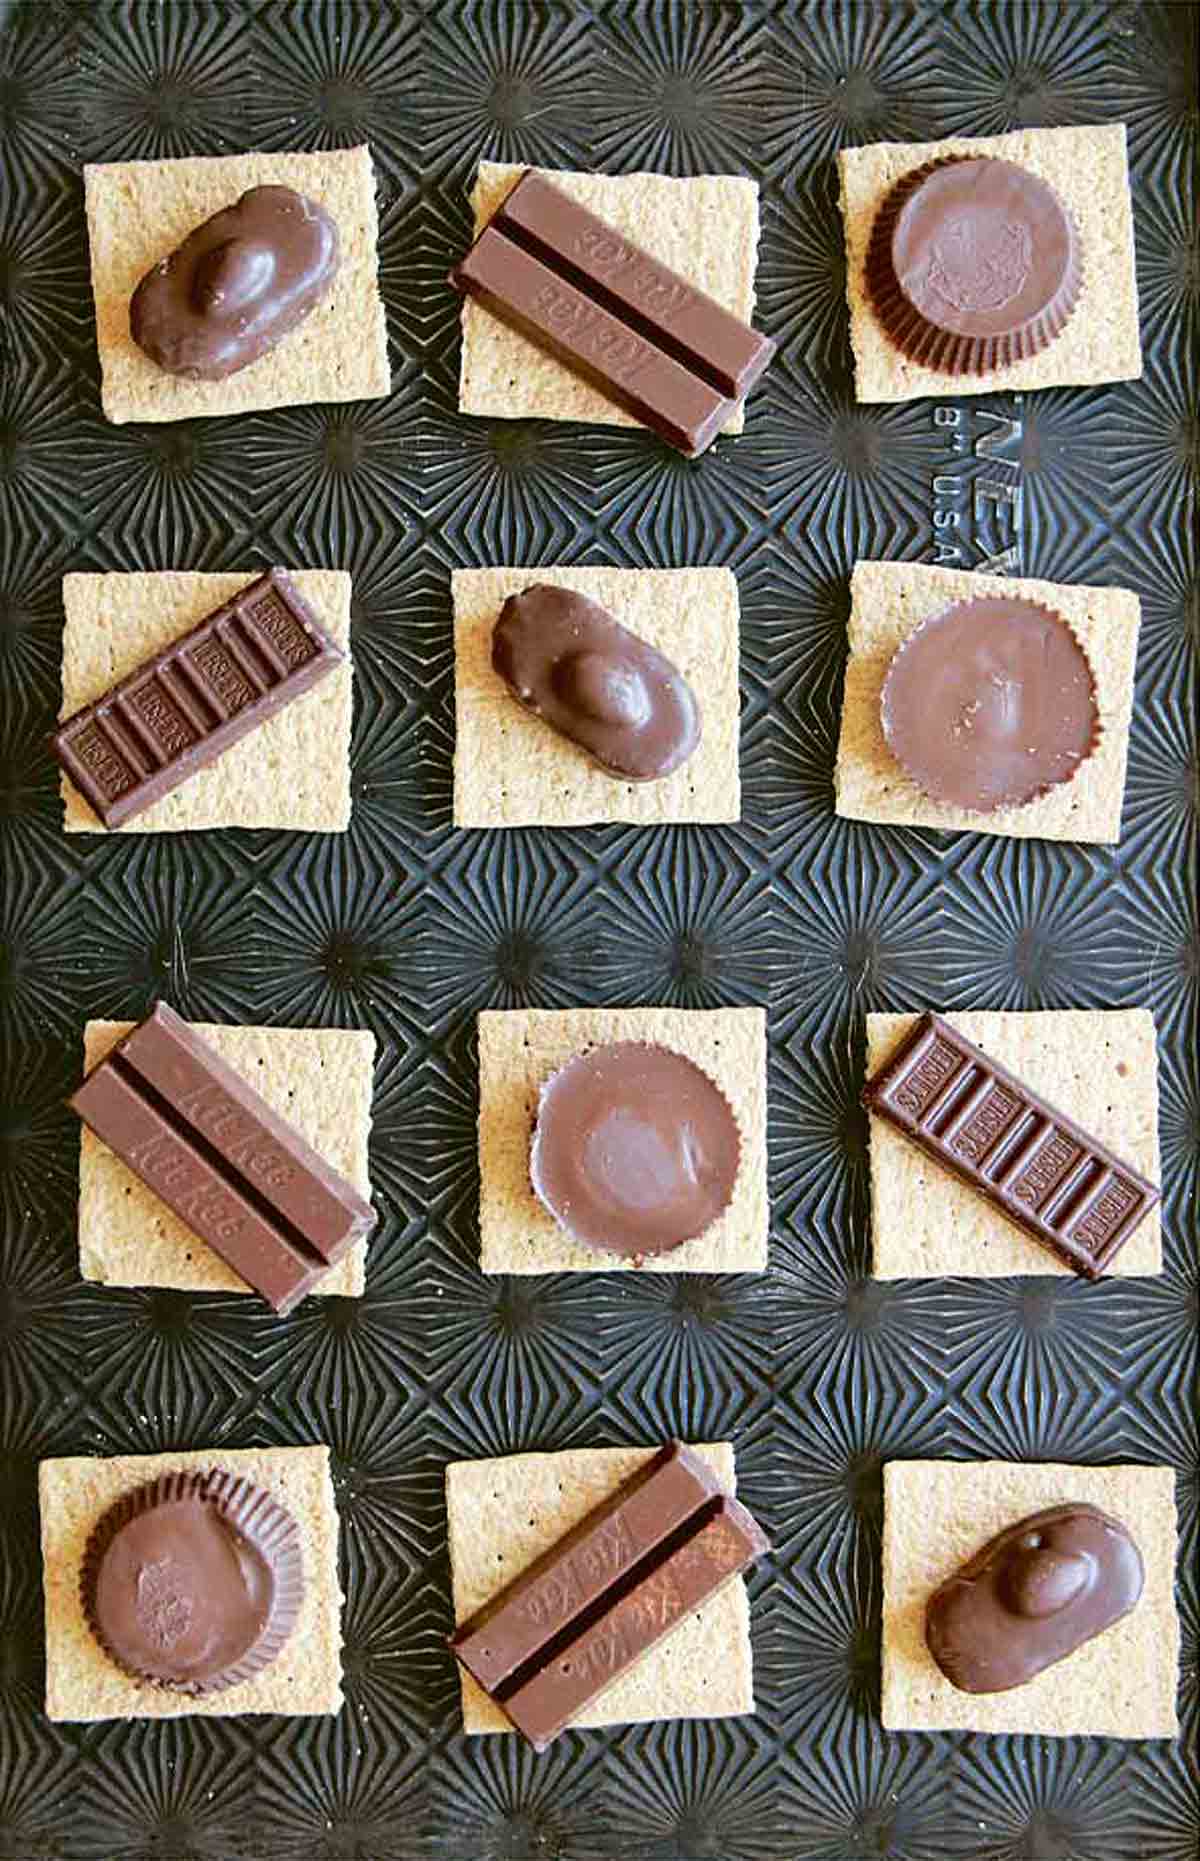 12 graham cracker squares topped with various candy bar pieces.